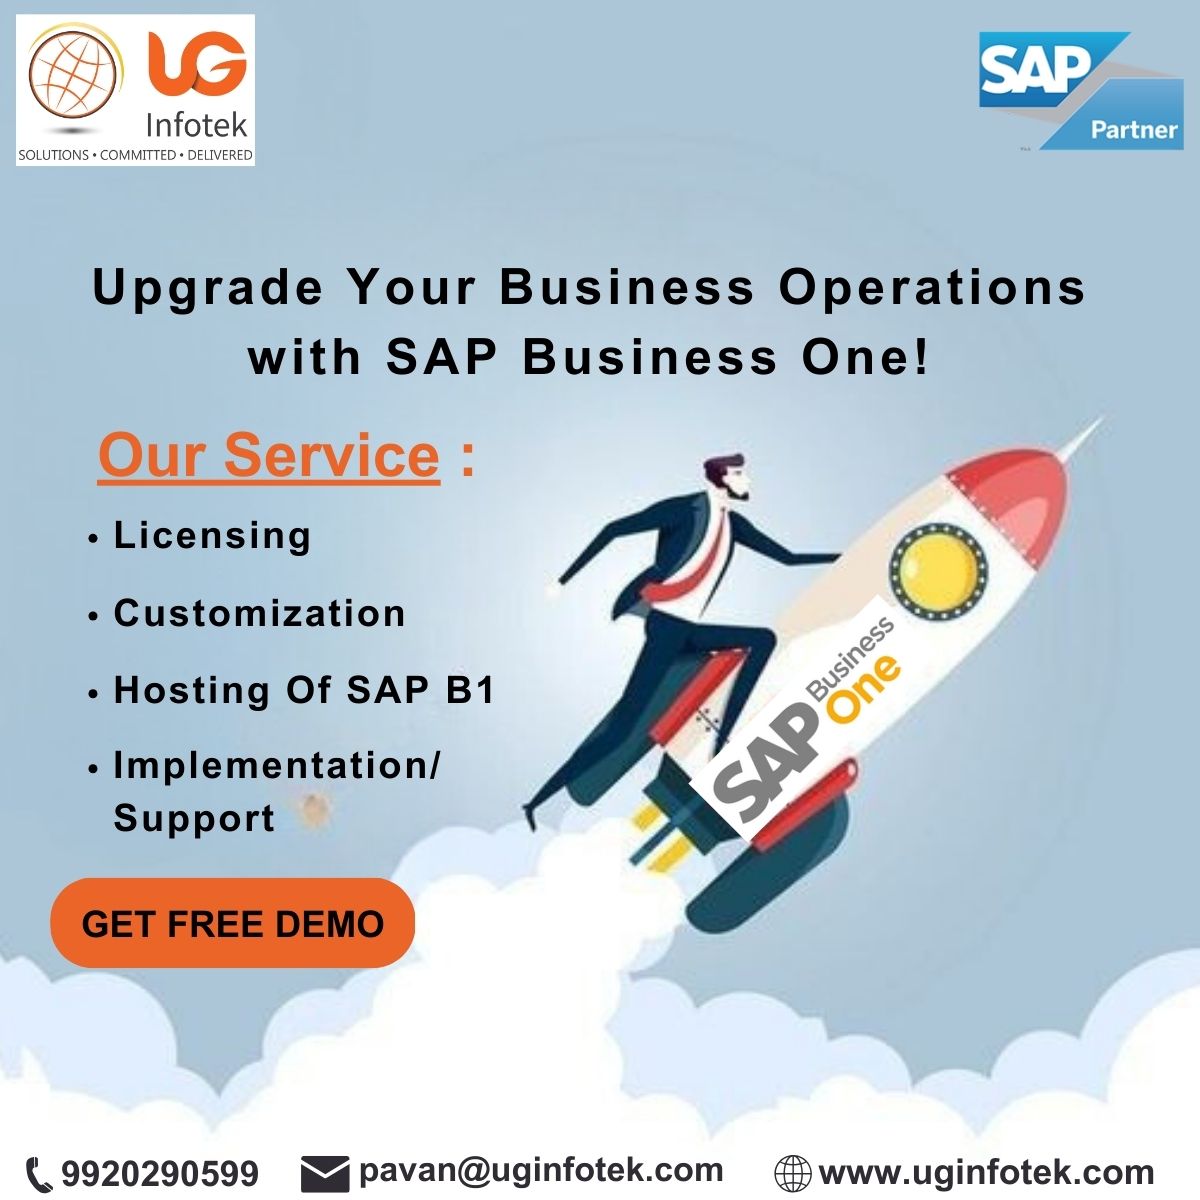 Unlock your business's full potential with SAP Business One from UG Infotek LLP. Seamlessly integrated, expertly supported, and tailored to your needs. Let's grow together! #sapbusinessone #inventorymanagement #affordableprice #uginfotekllp #sapb1 #erpsolutions #b2b #singapore